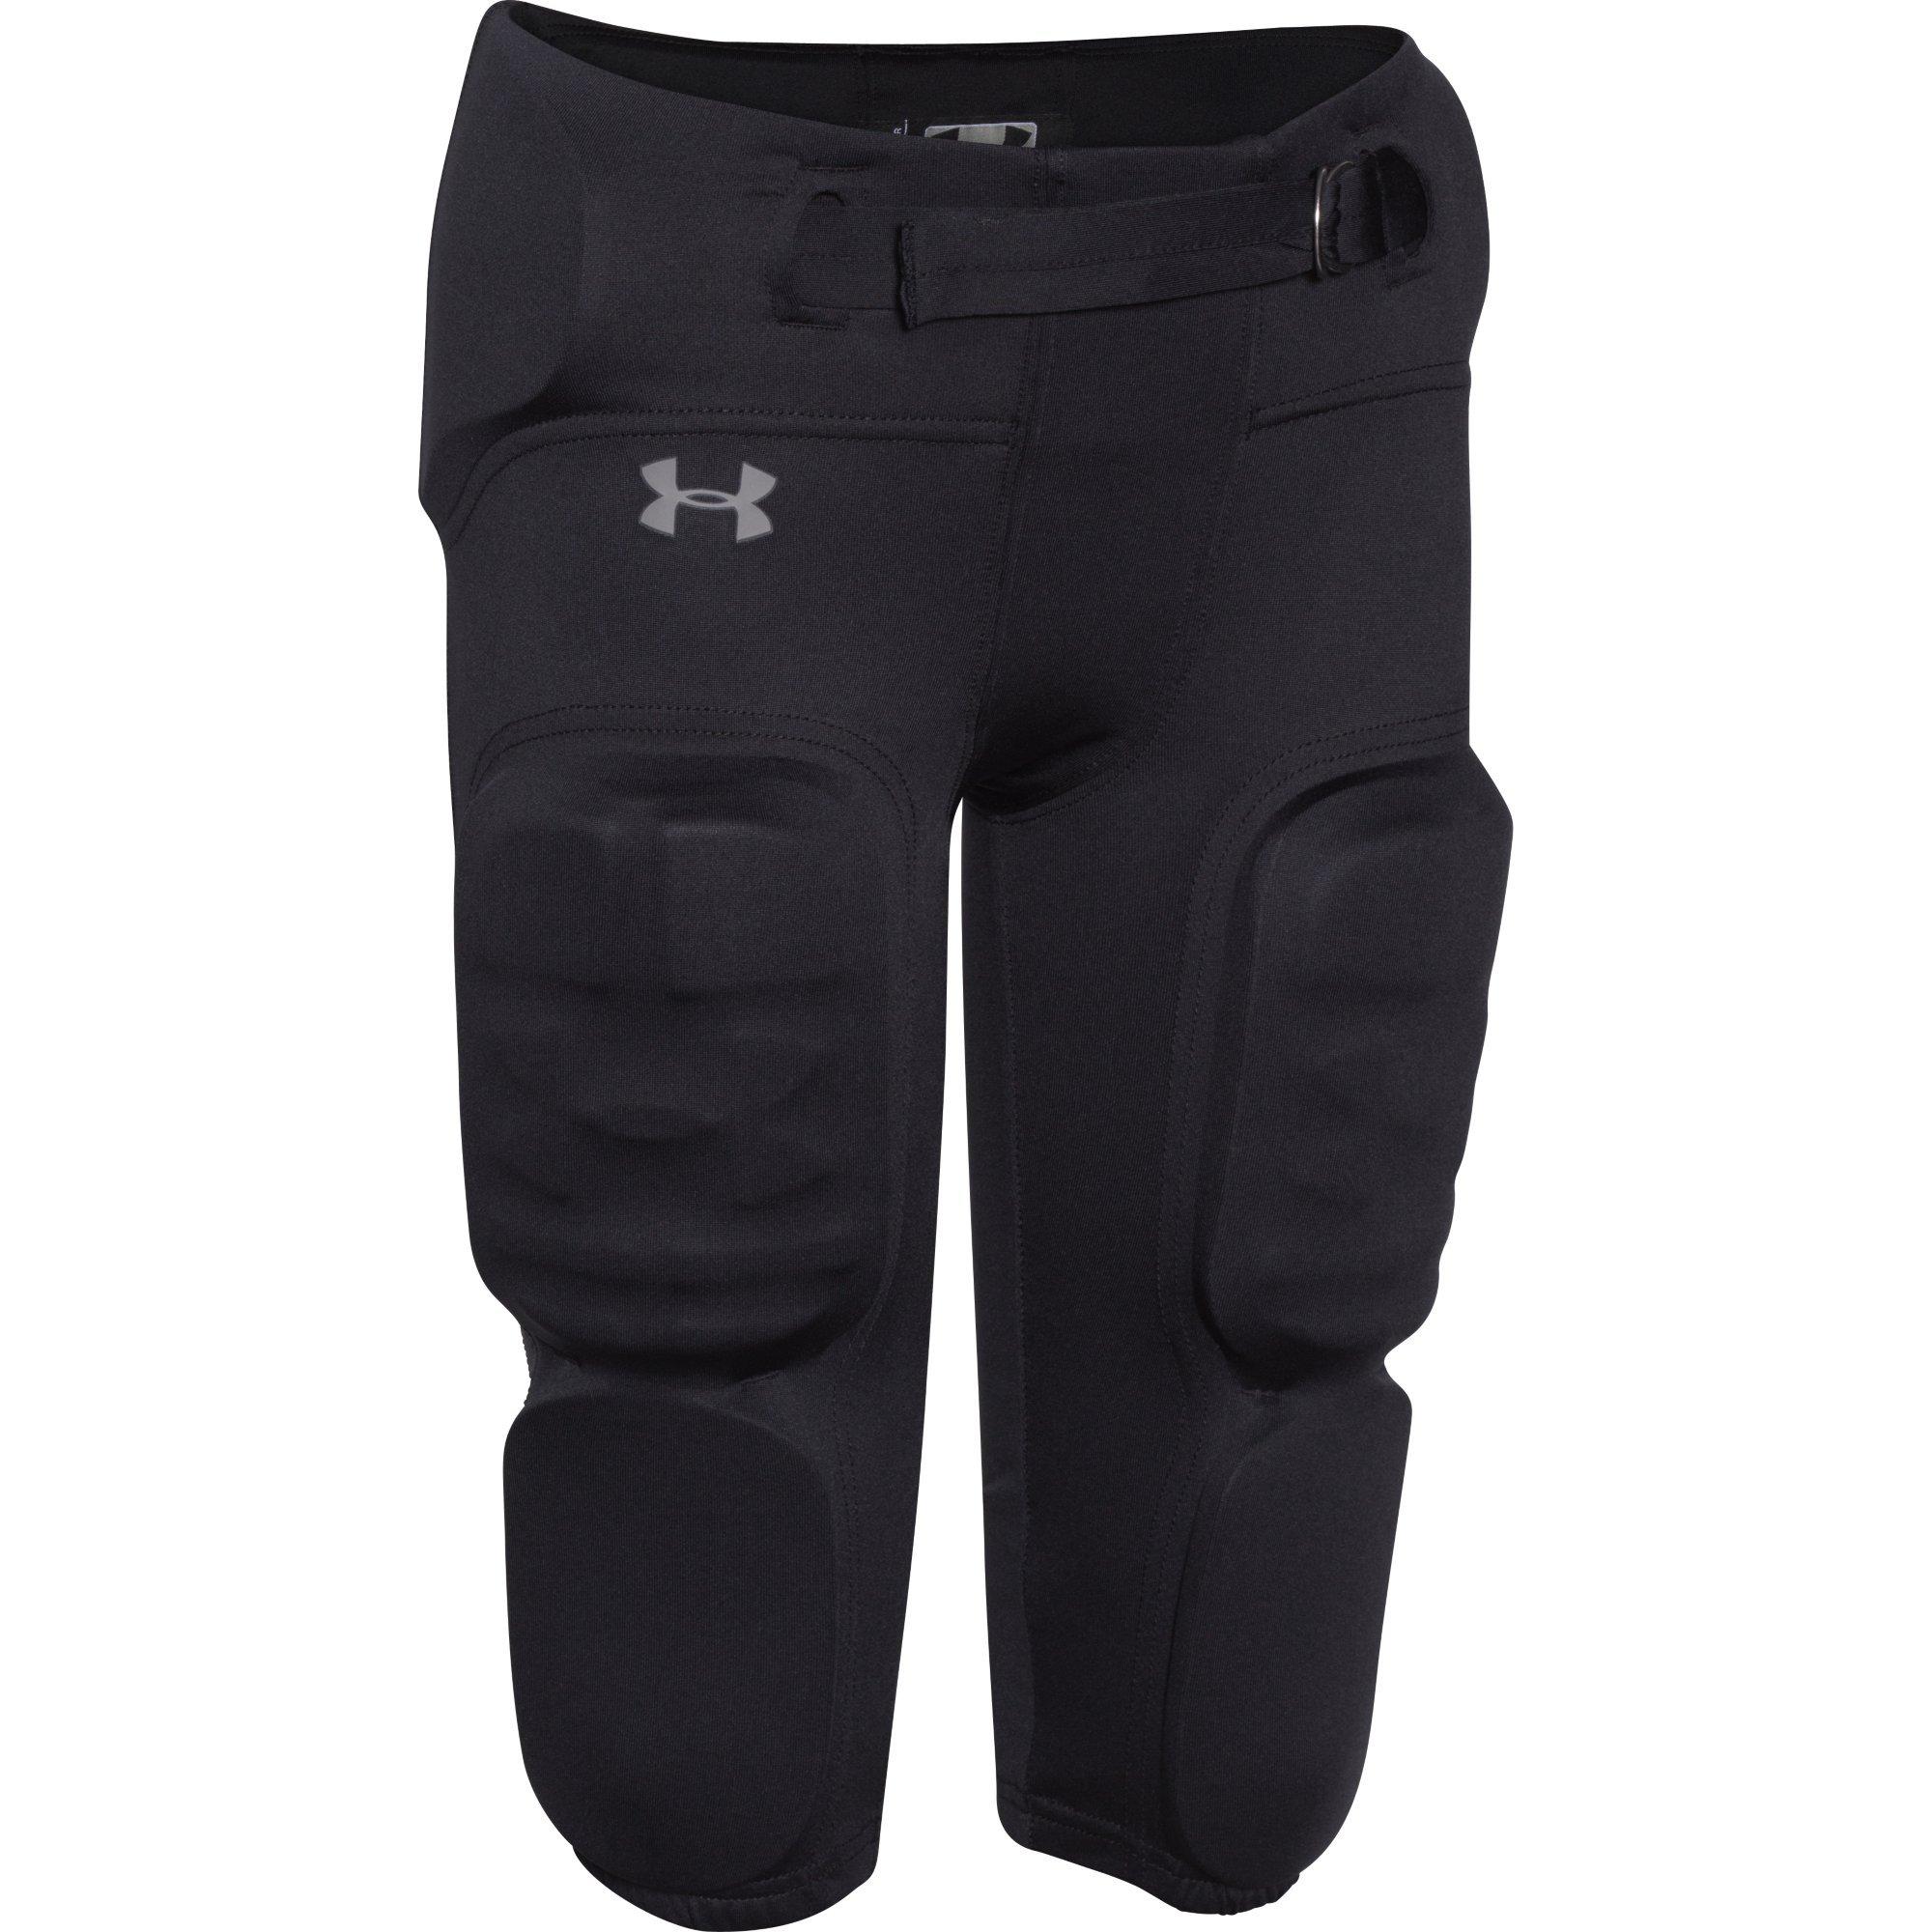 under armour integrated football pants